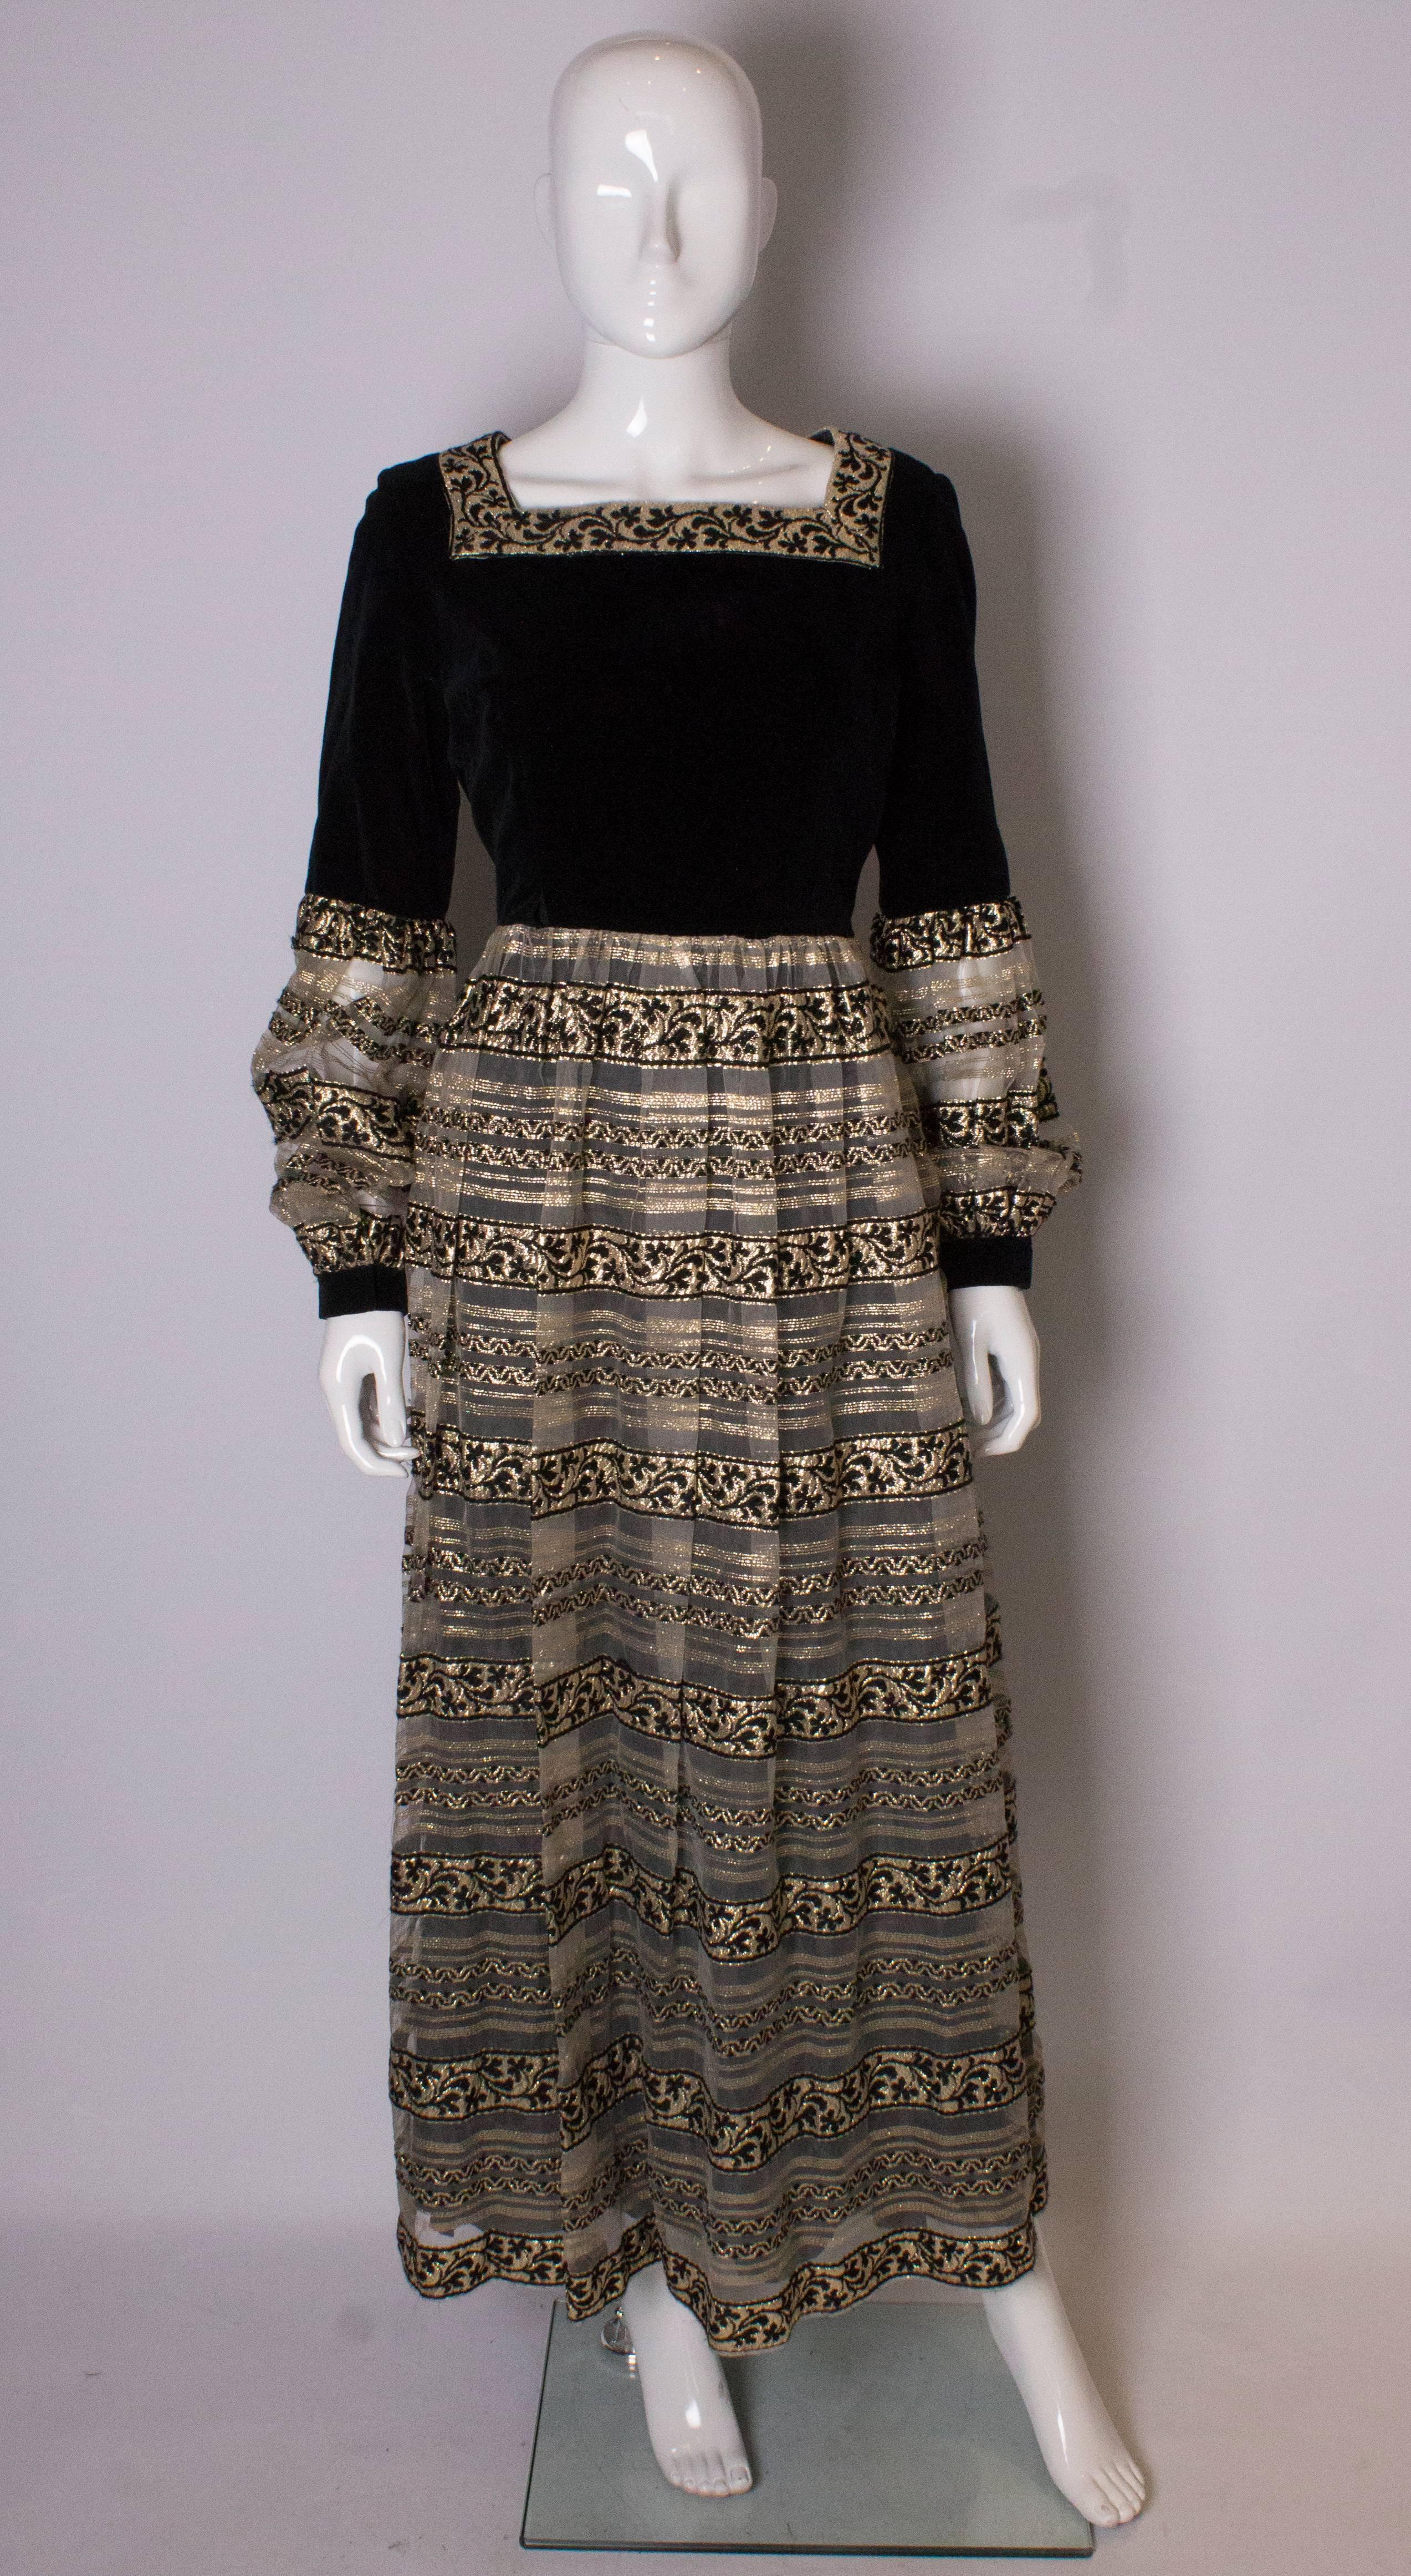 A chic gown by Susan Small.  The dress has a black velvet upper body and upper sleeves, with a gold and black skirt and lower sleeves.